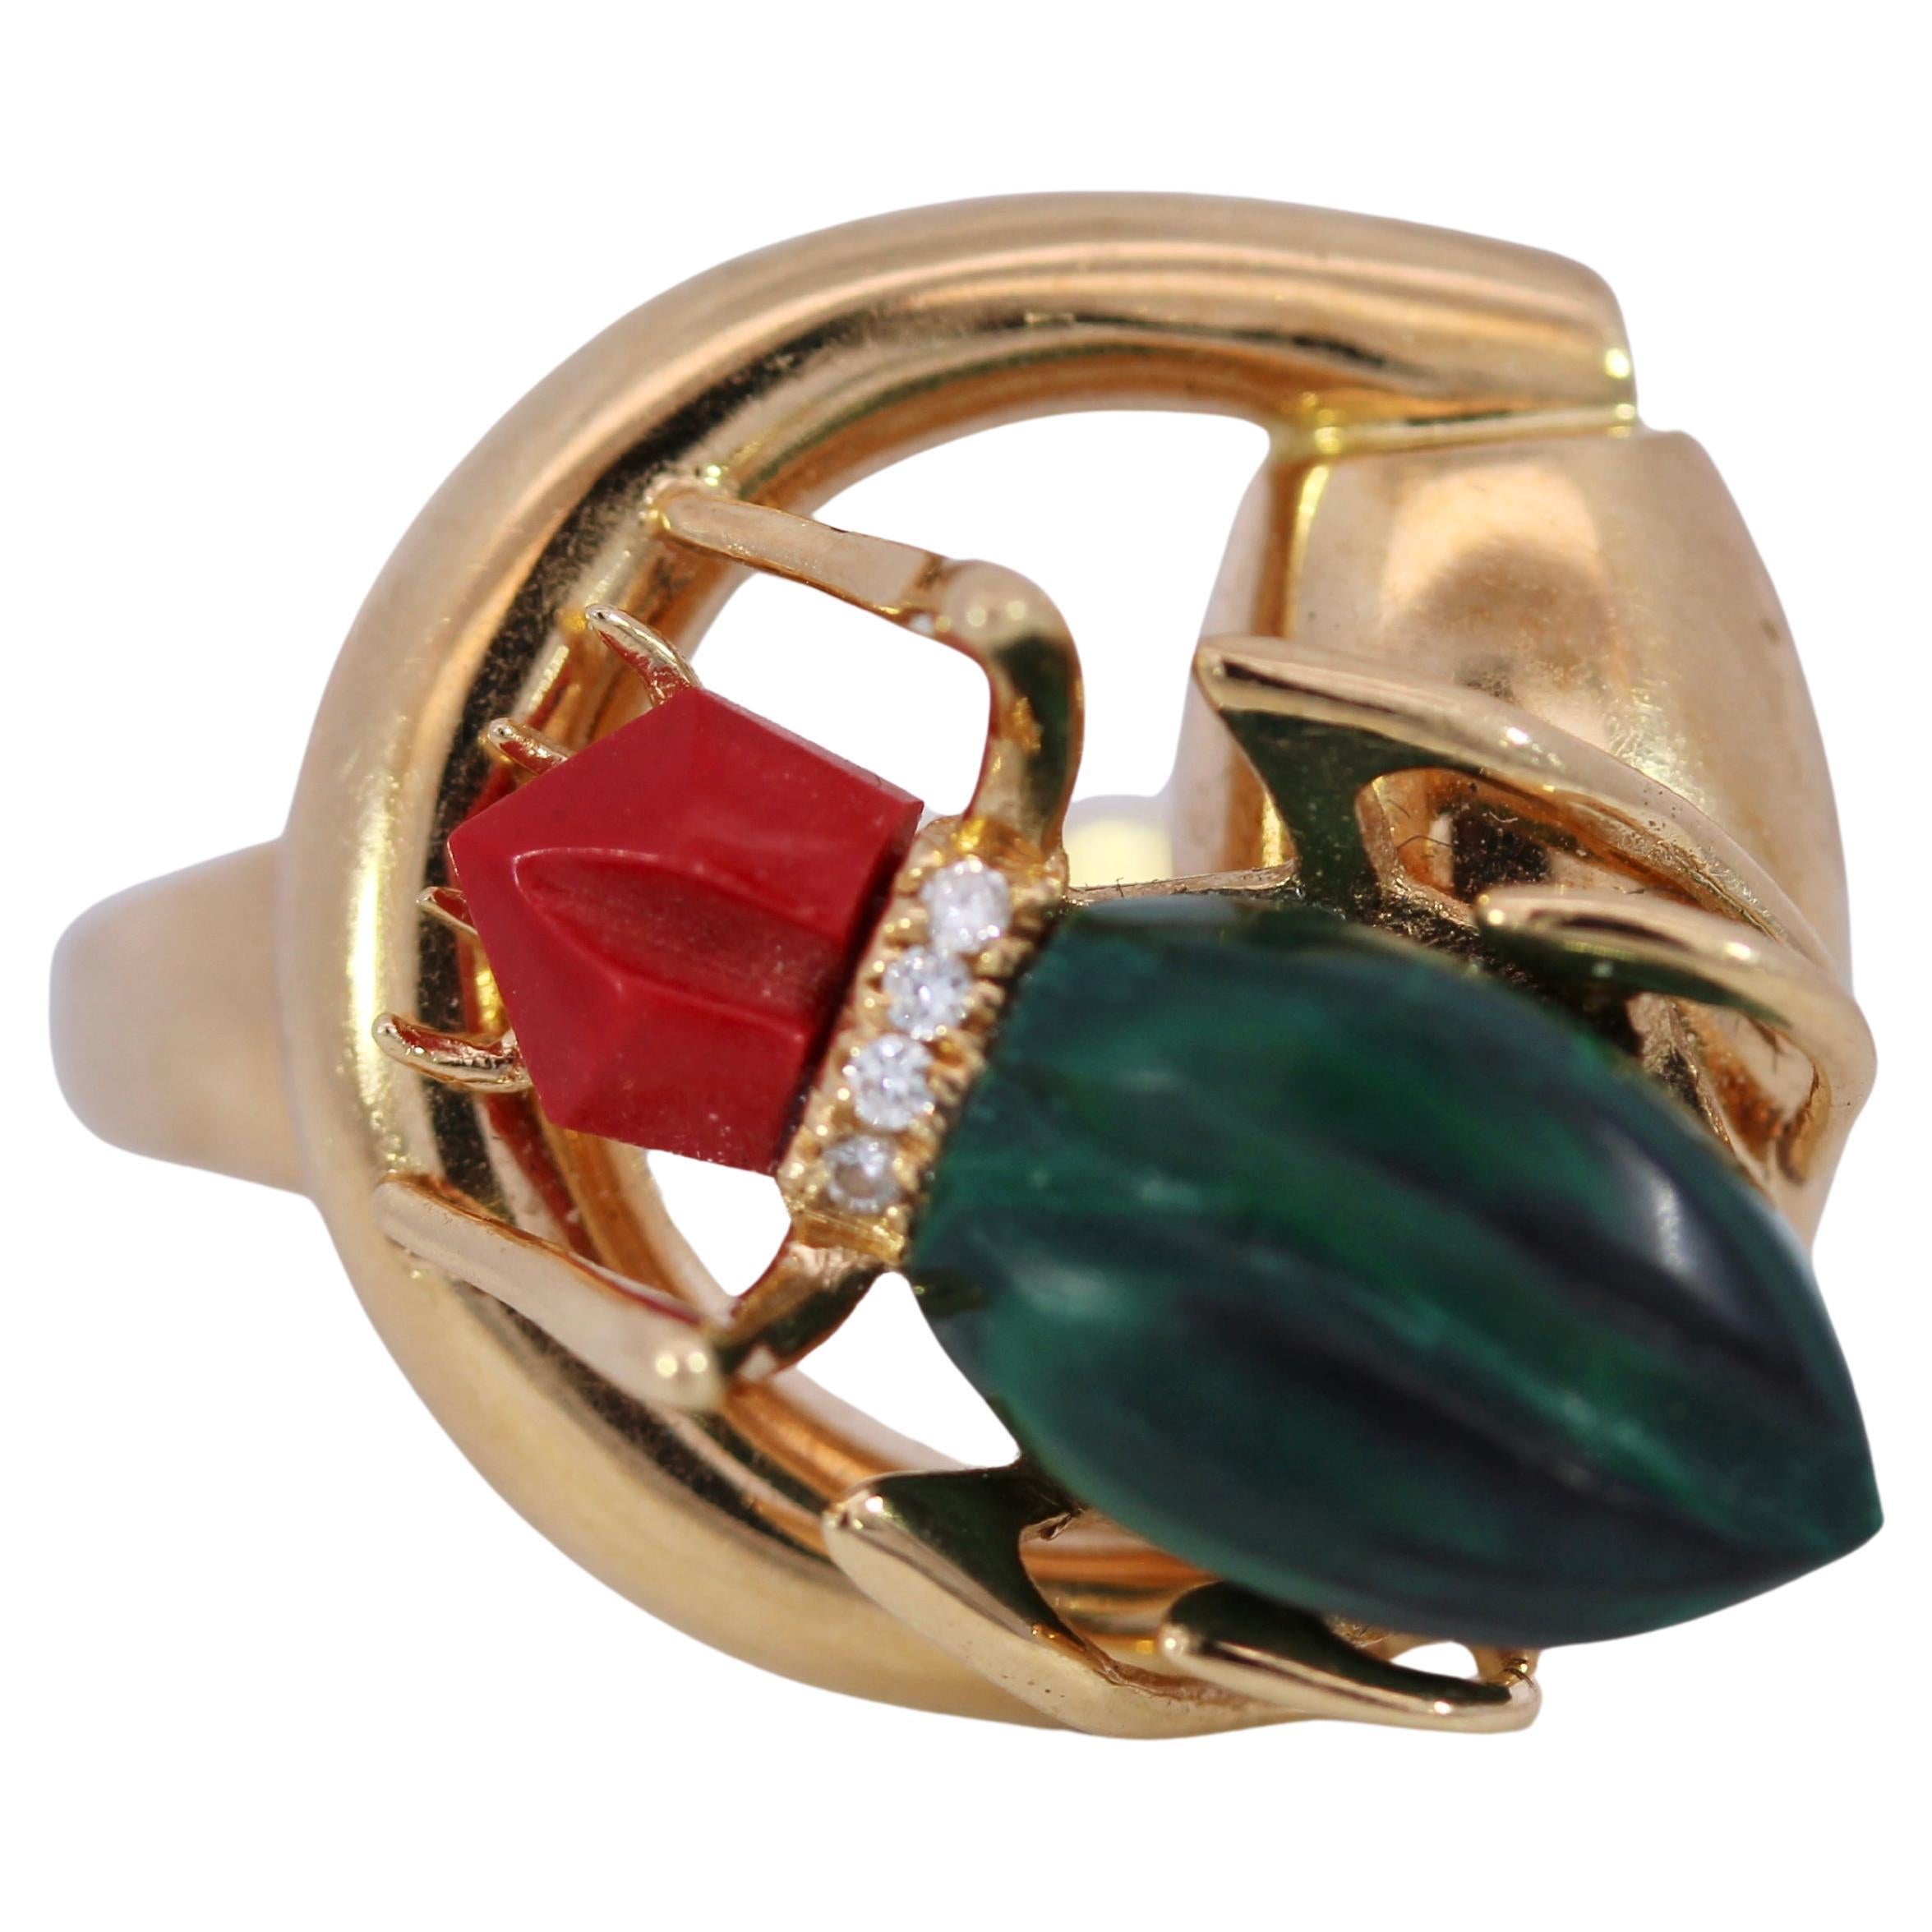 Gucci Milano 18K Yellow Gold Beetle Ring With Diamonds, Coral And Malachi For Sale